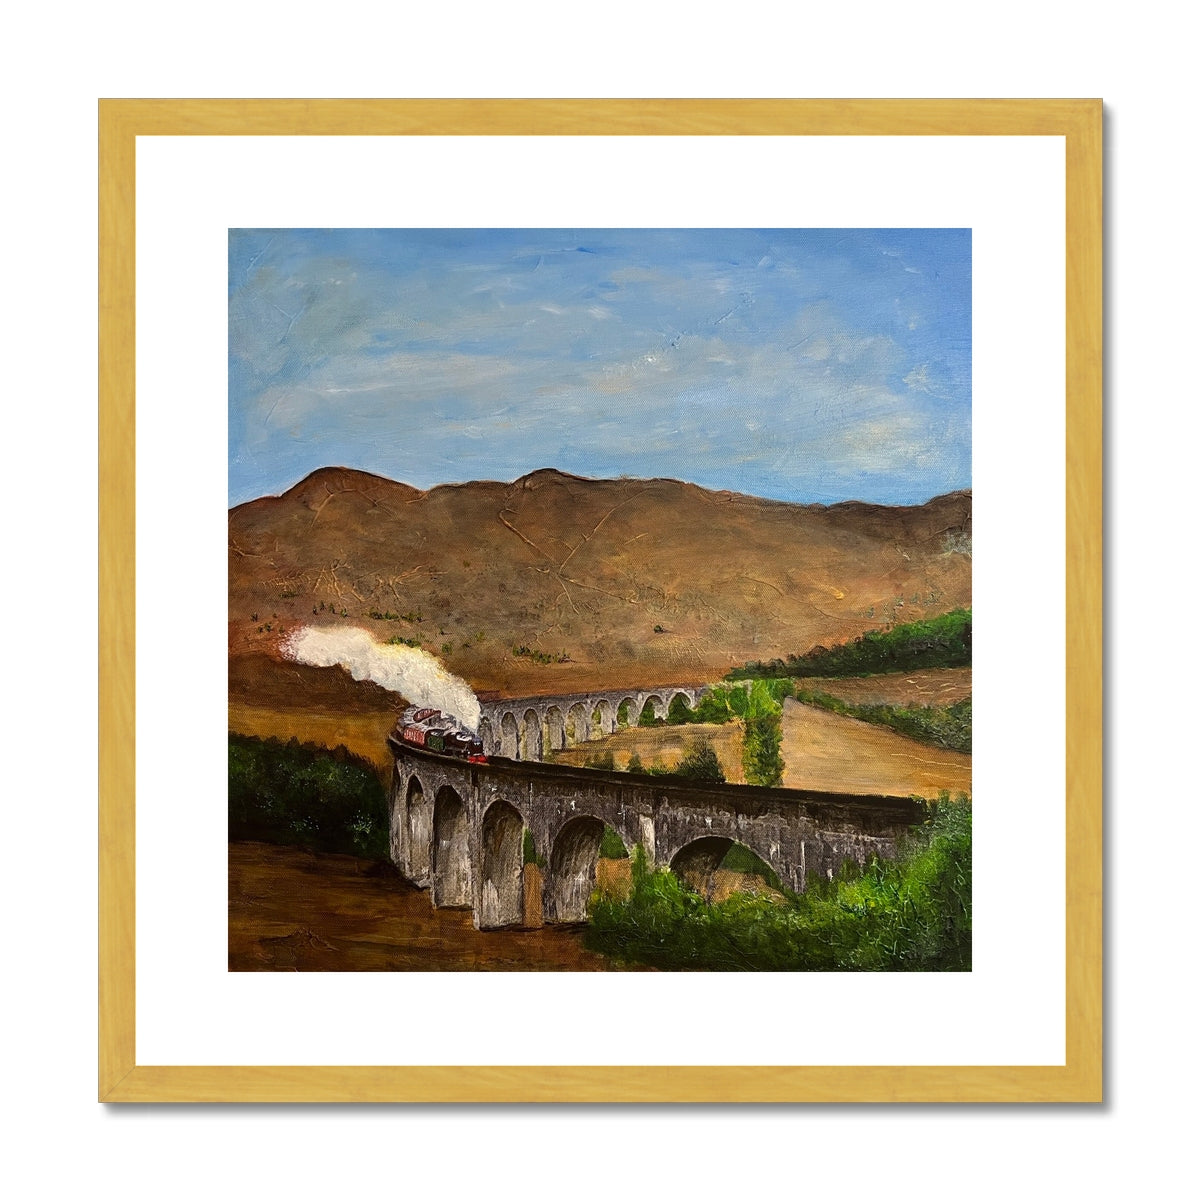 Glenfinnan Viaduct Painting | Antique Framed & Mounted Prints From Scotland-Antique Framed & Mounted Prints-Scottish Highlands & Lowlands Art Gallery-20"x20"-Gold Frame-Paintings, Prints, Homeware, Art Gifts From Scotland By Scottish Artist Kevin Hunter